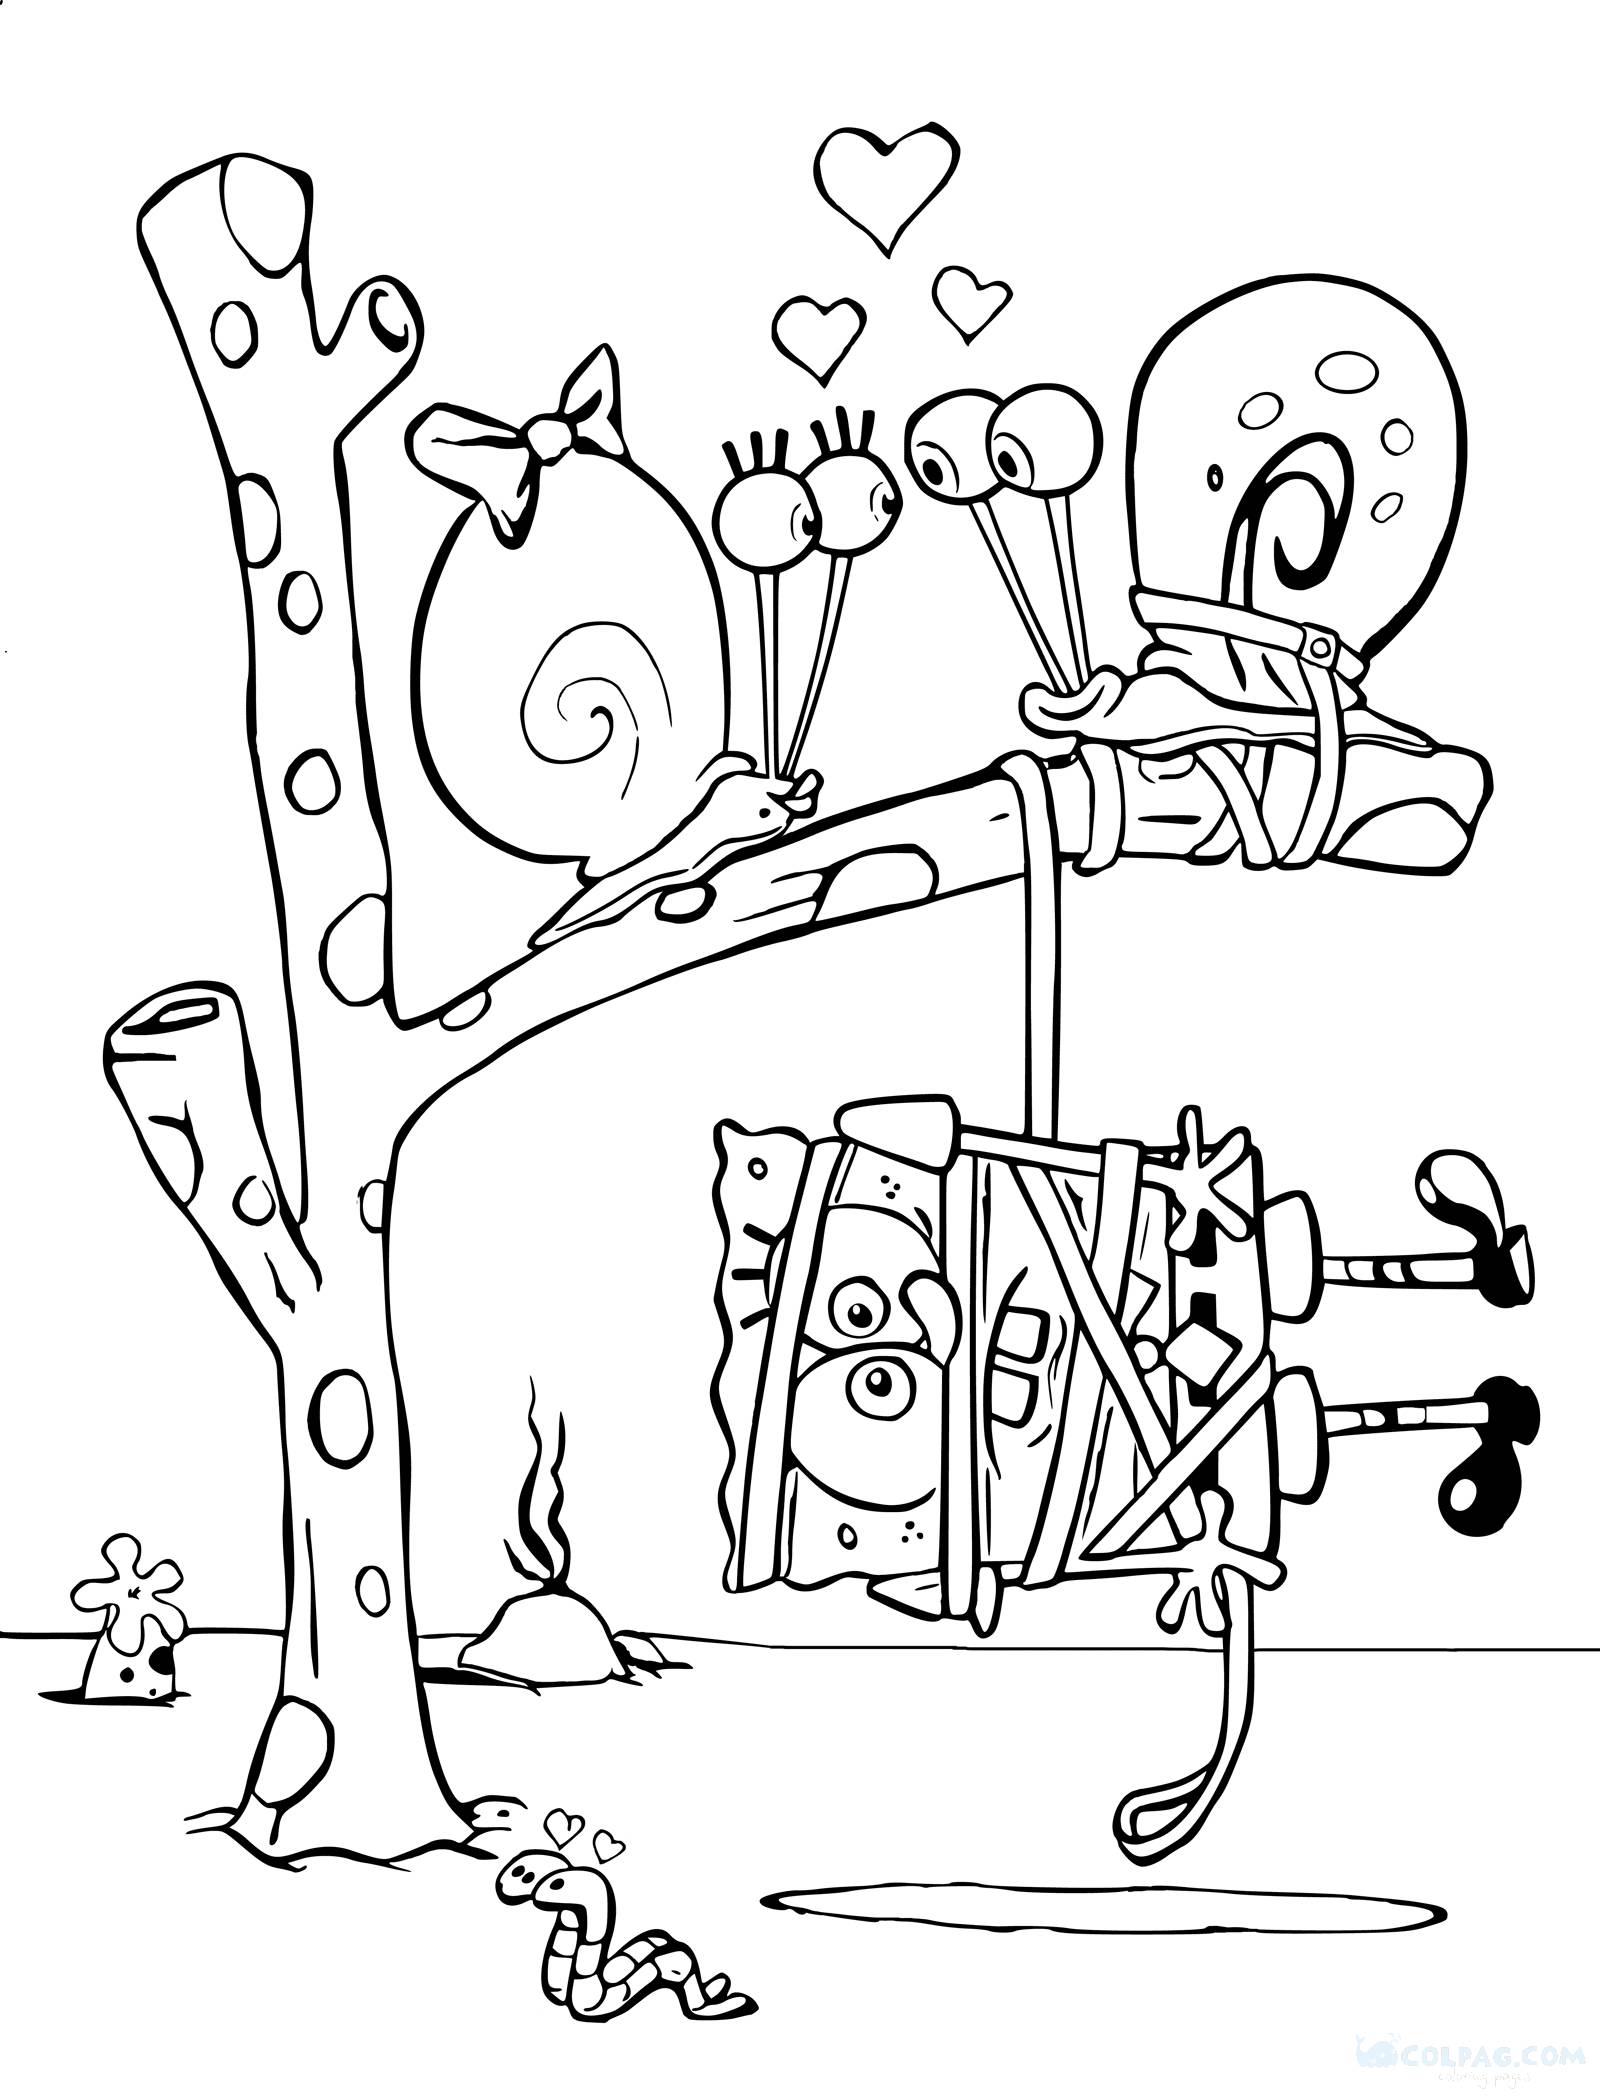 Sponge Bob Coloring Pages to Print